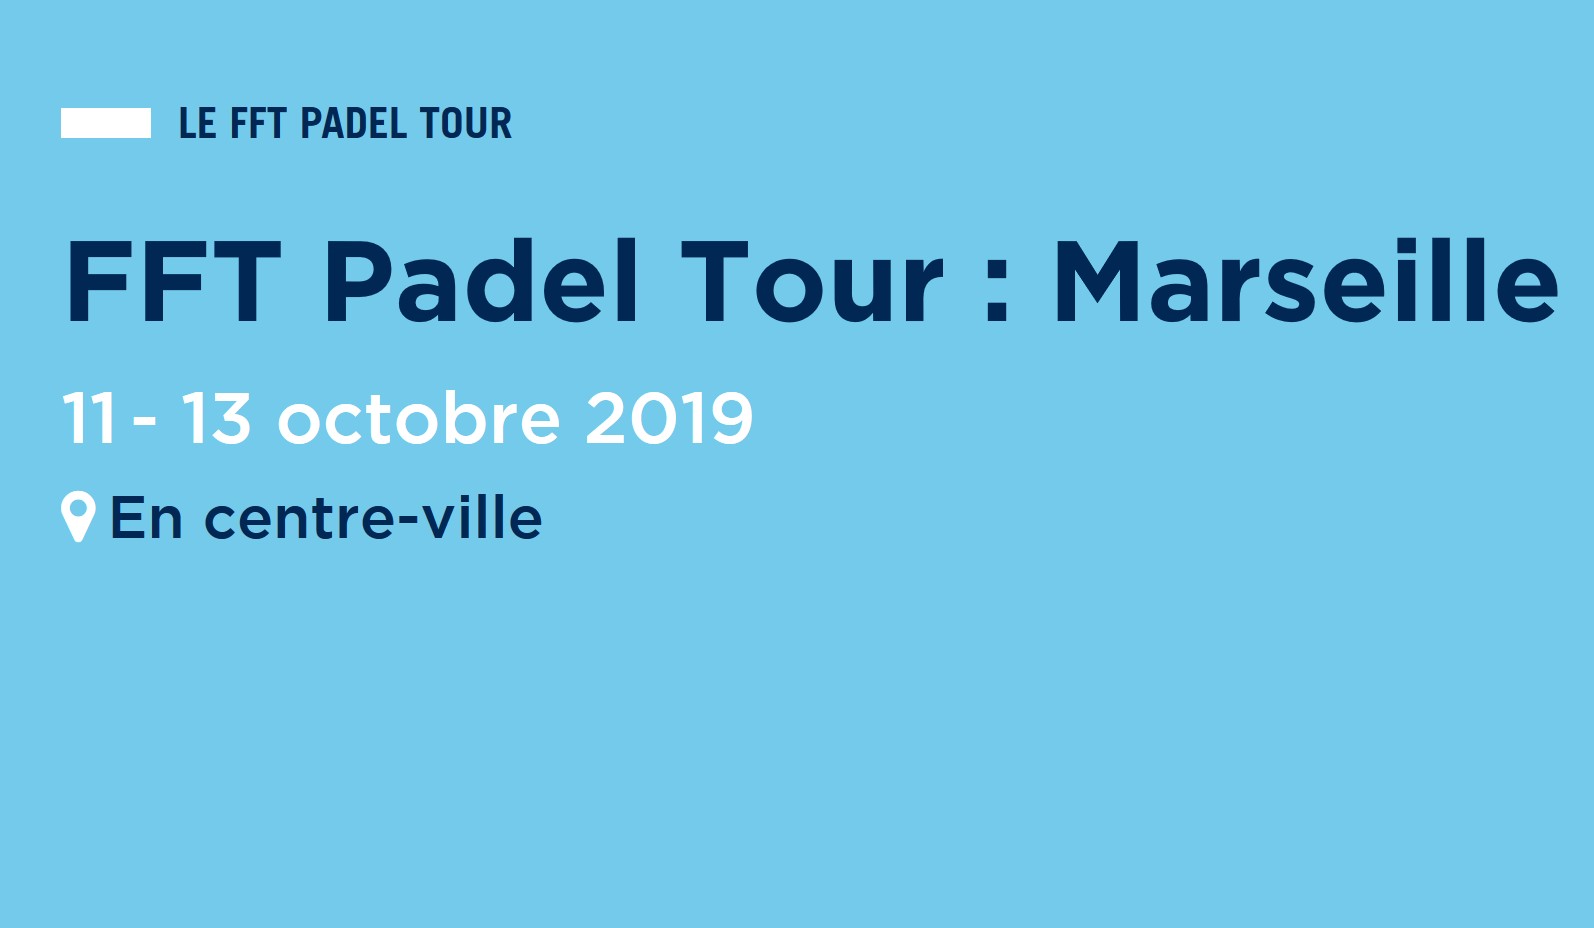 FFT Padel Tour Marseille – Dadels